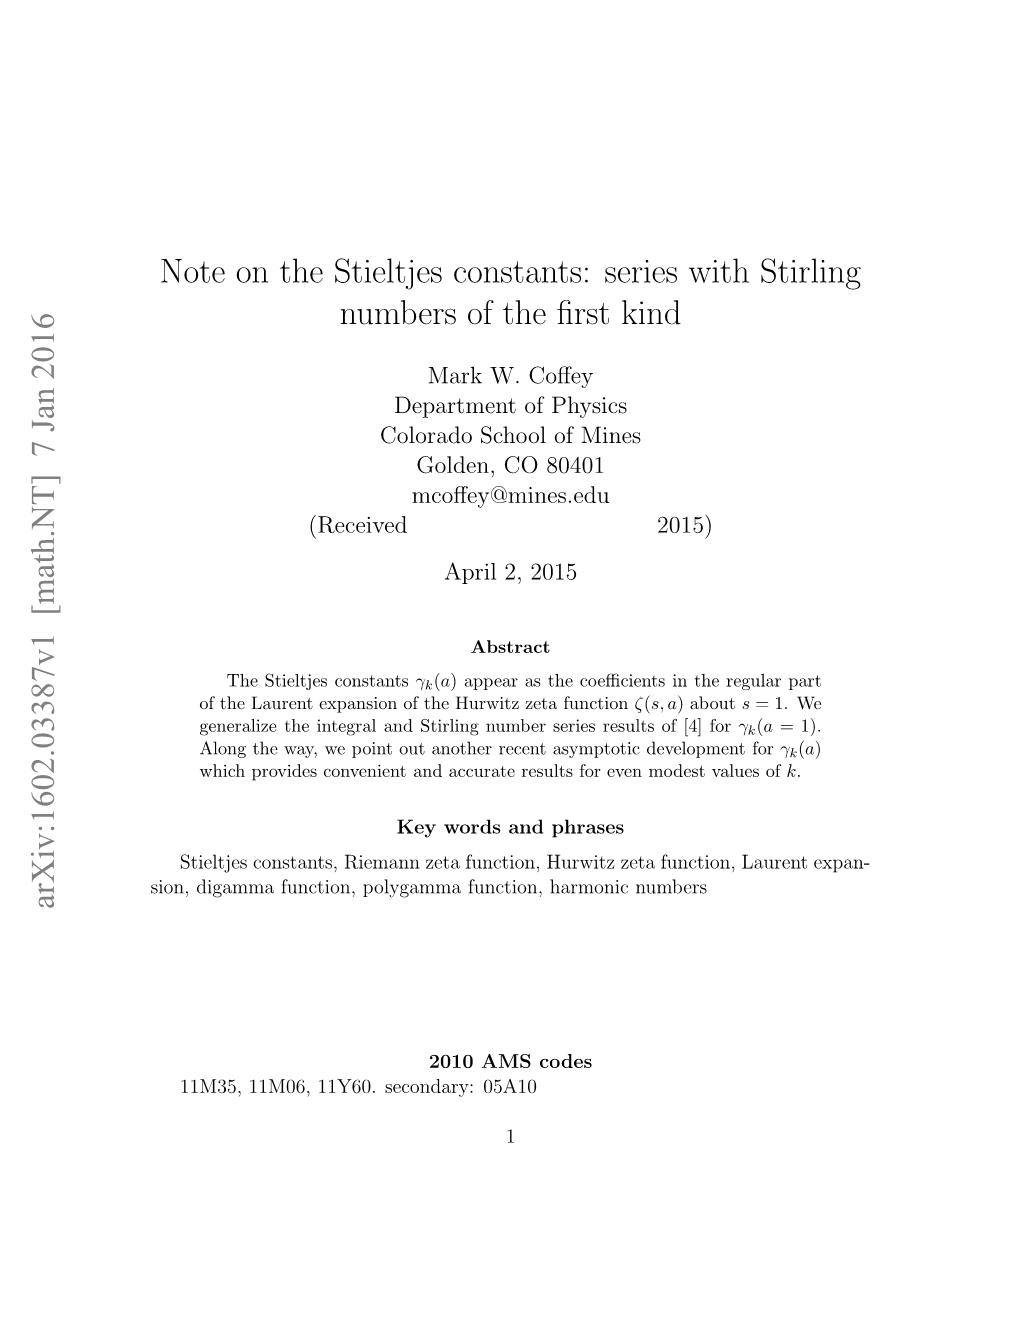 Note on the Stieltjes Constants: Series with Stirling Numbers of the First Kind